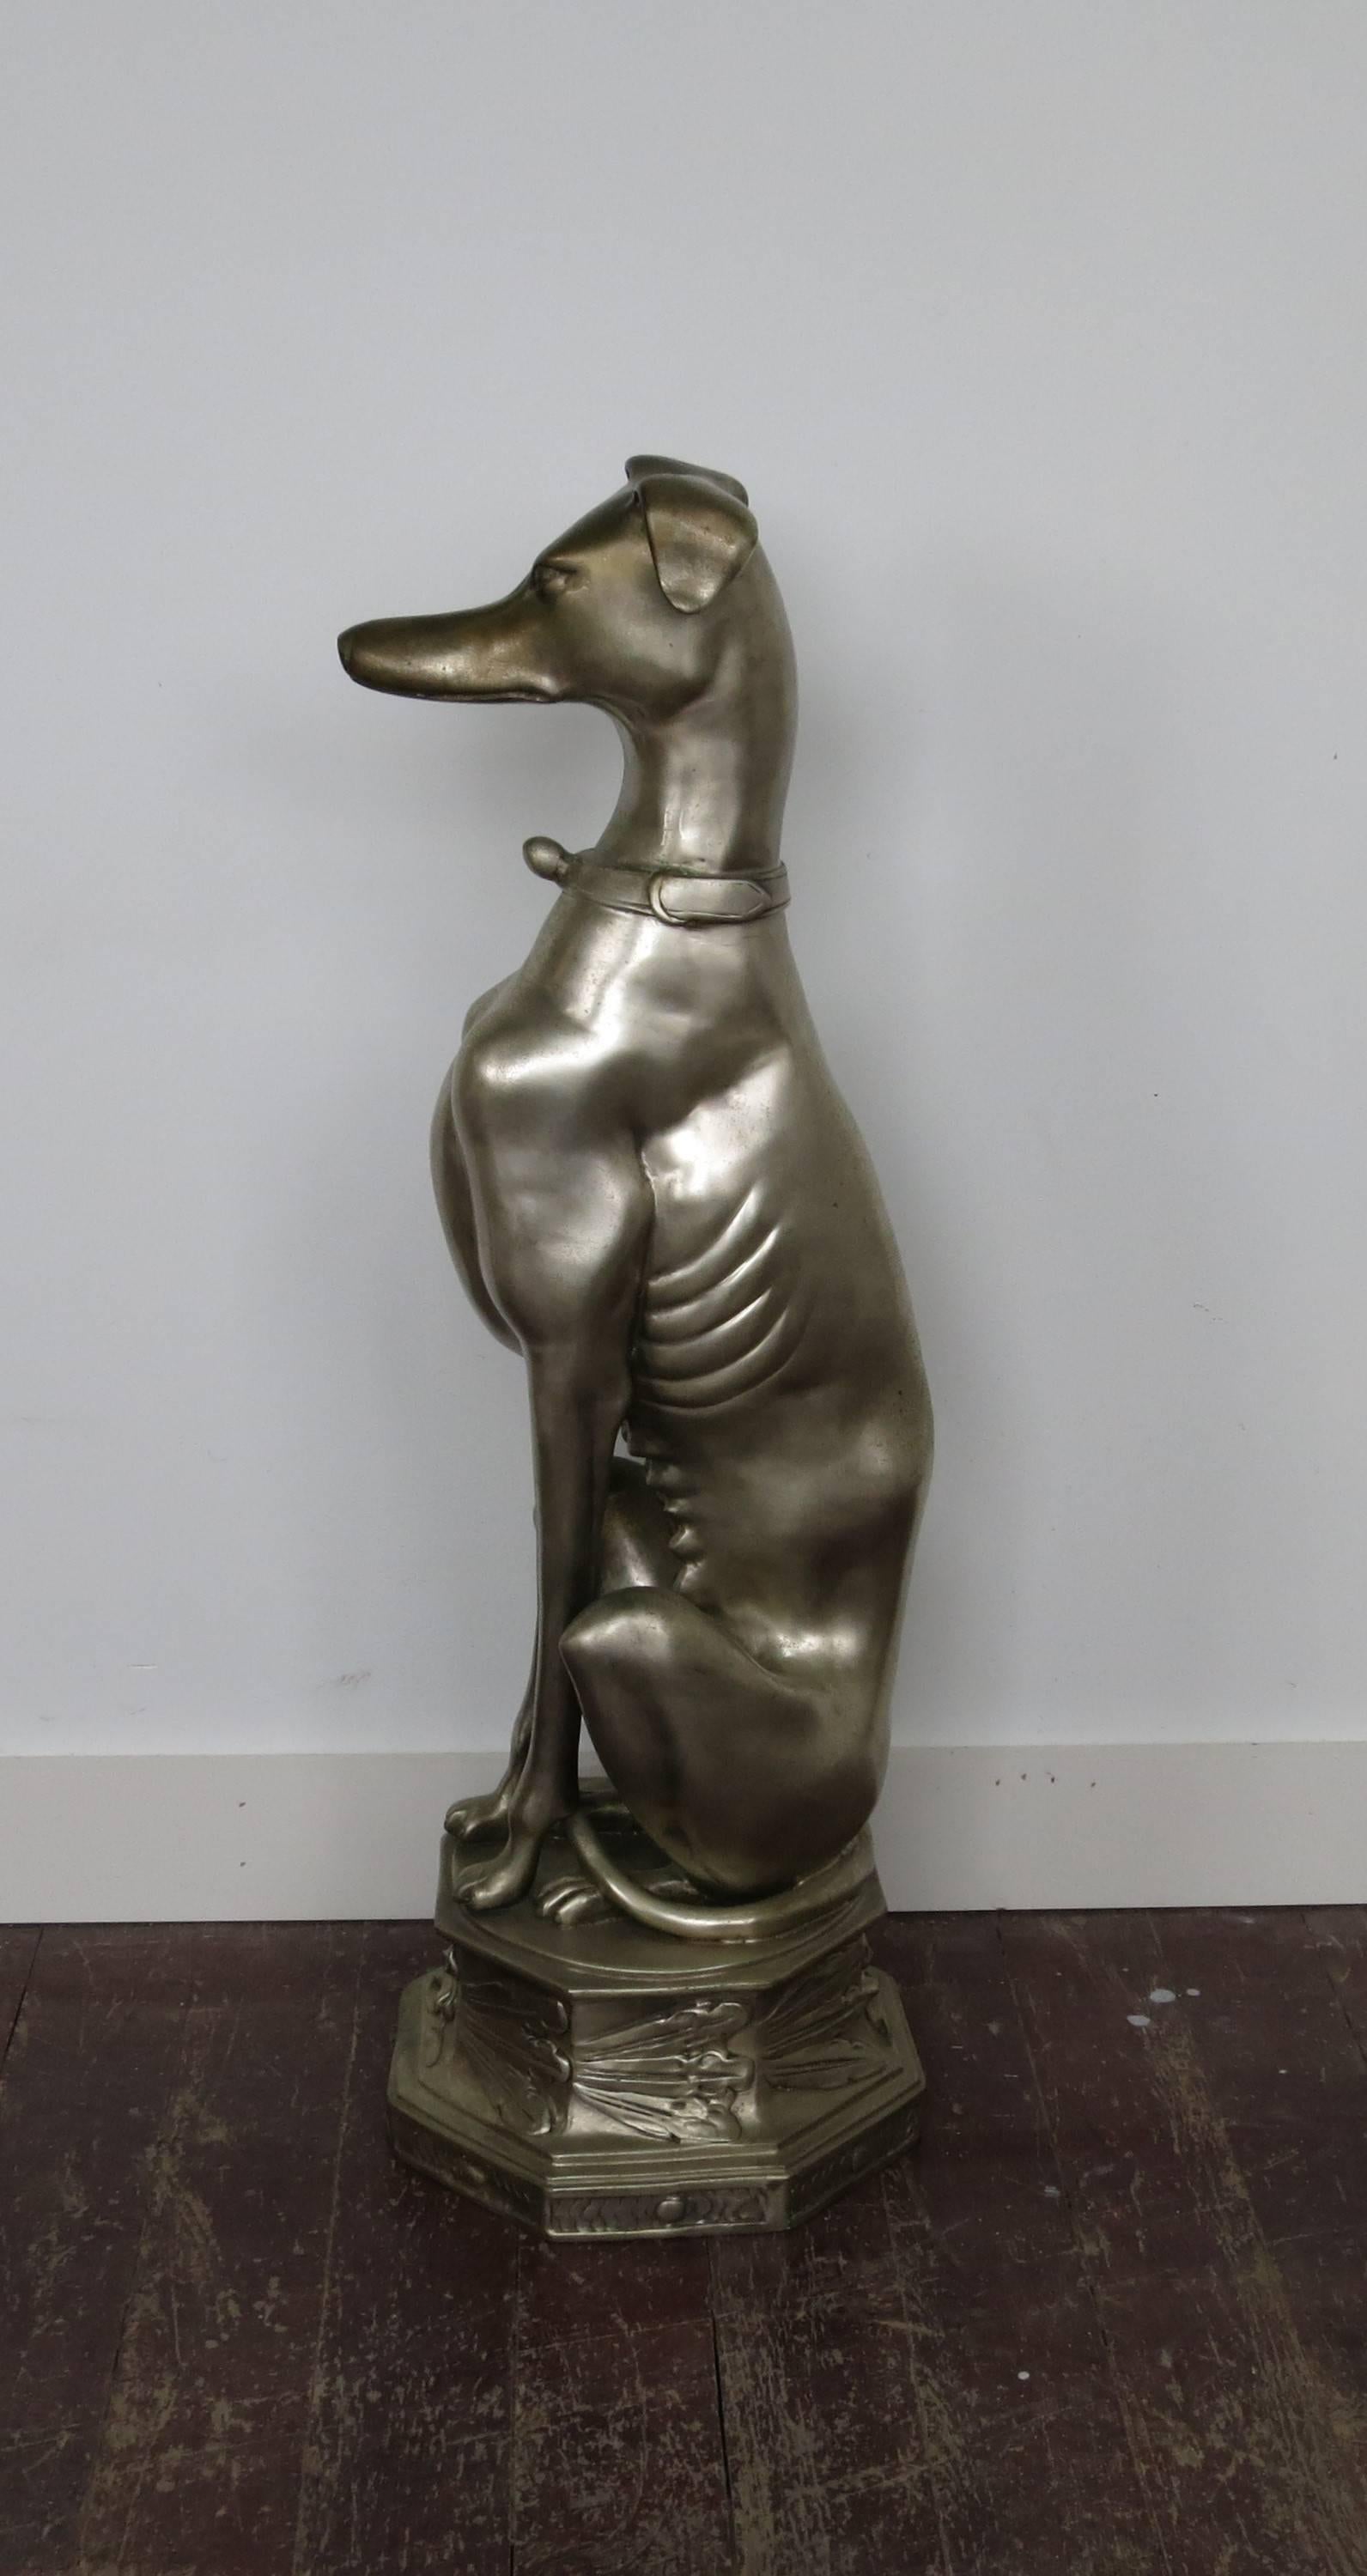 Silvered cast bronze whippet. It is 30.5' high and the base is 10